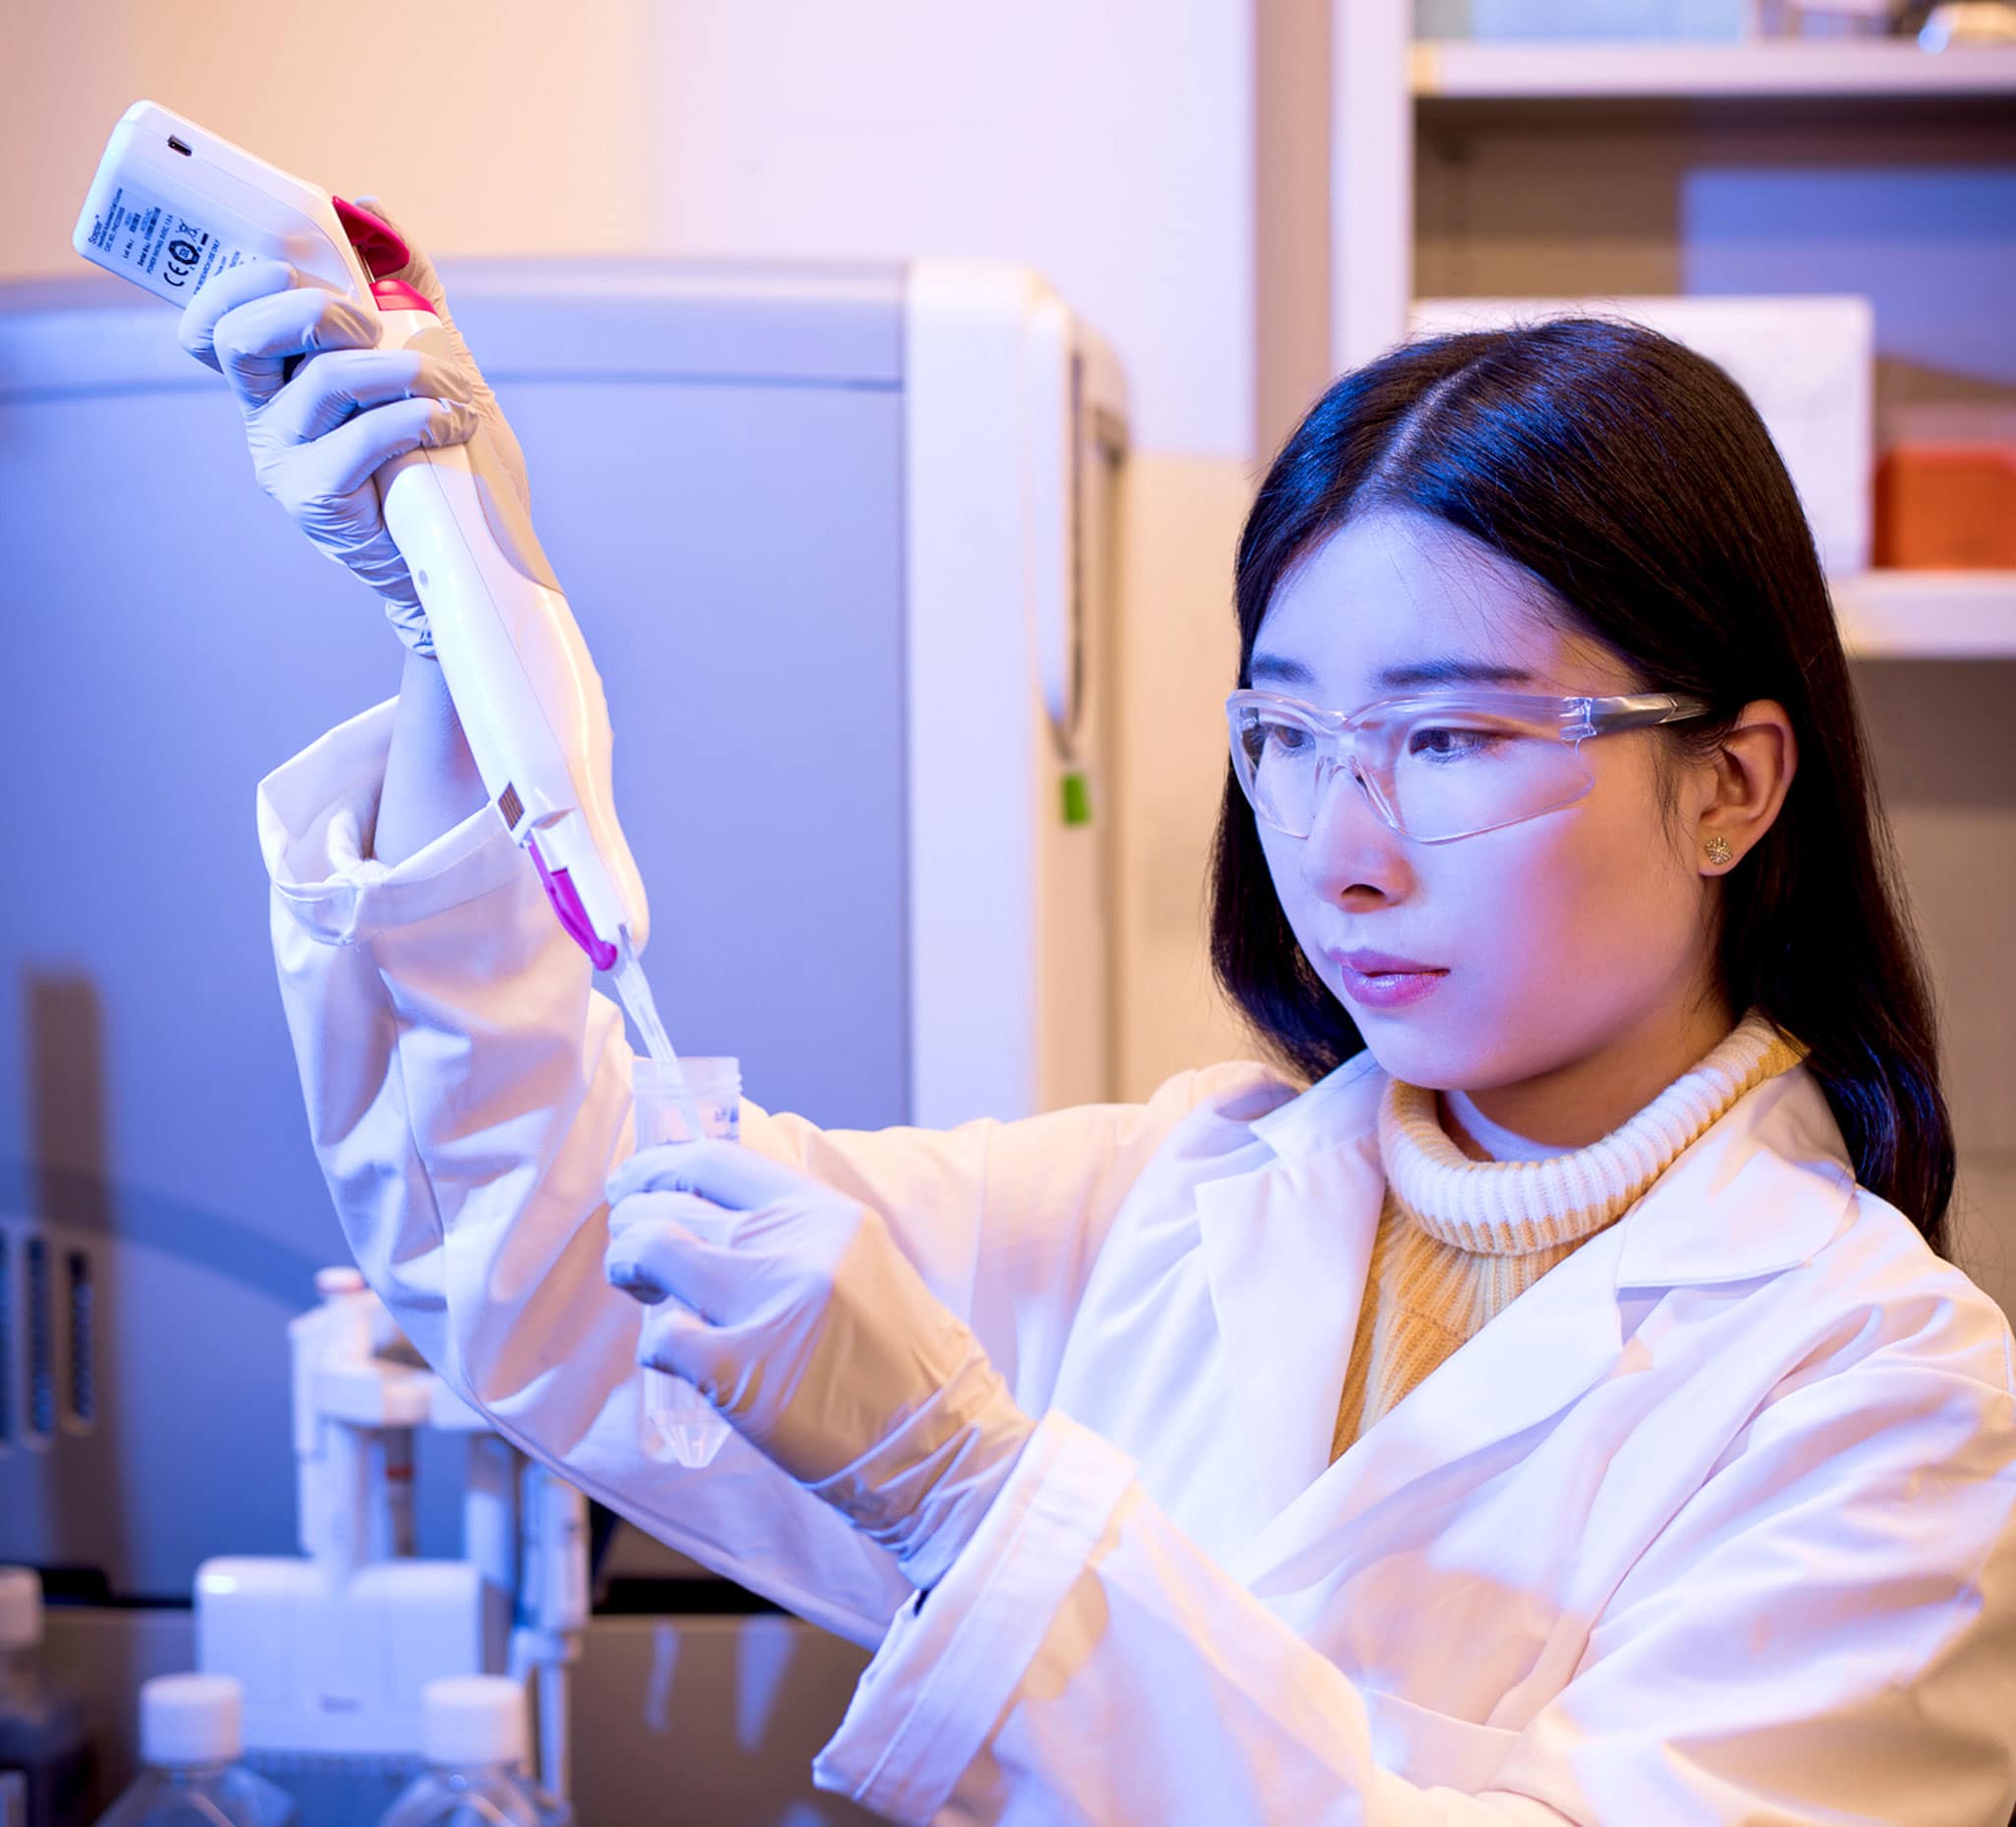 A woman wears a lab coat, gloves and goggles. She uses a handheld gadget to add liquid to a plastic test tube.